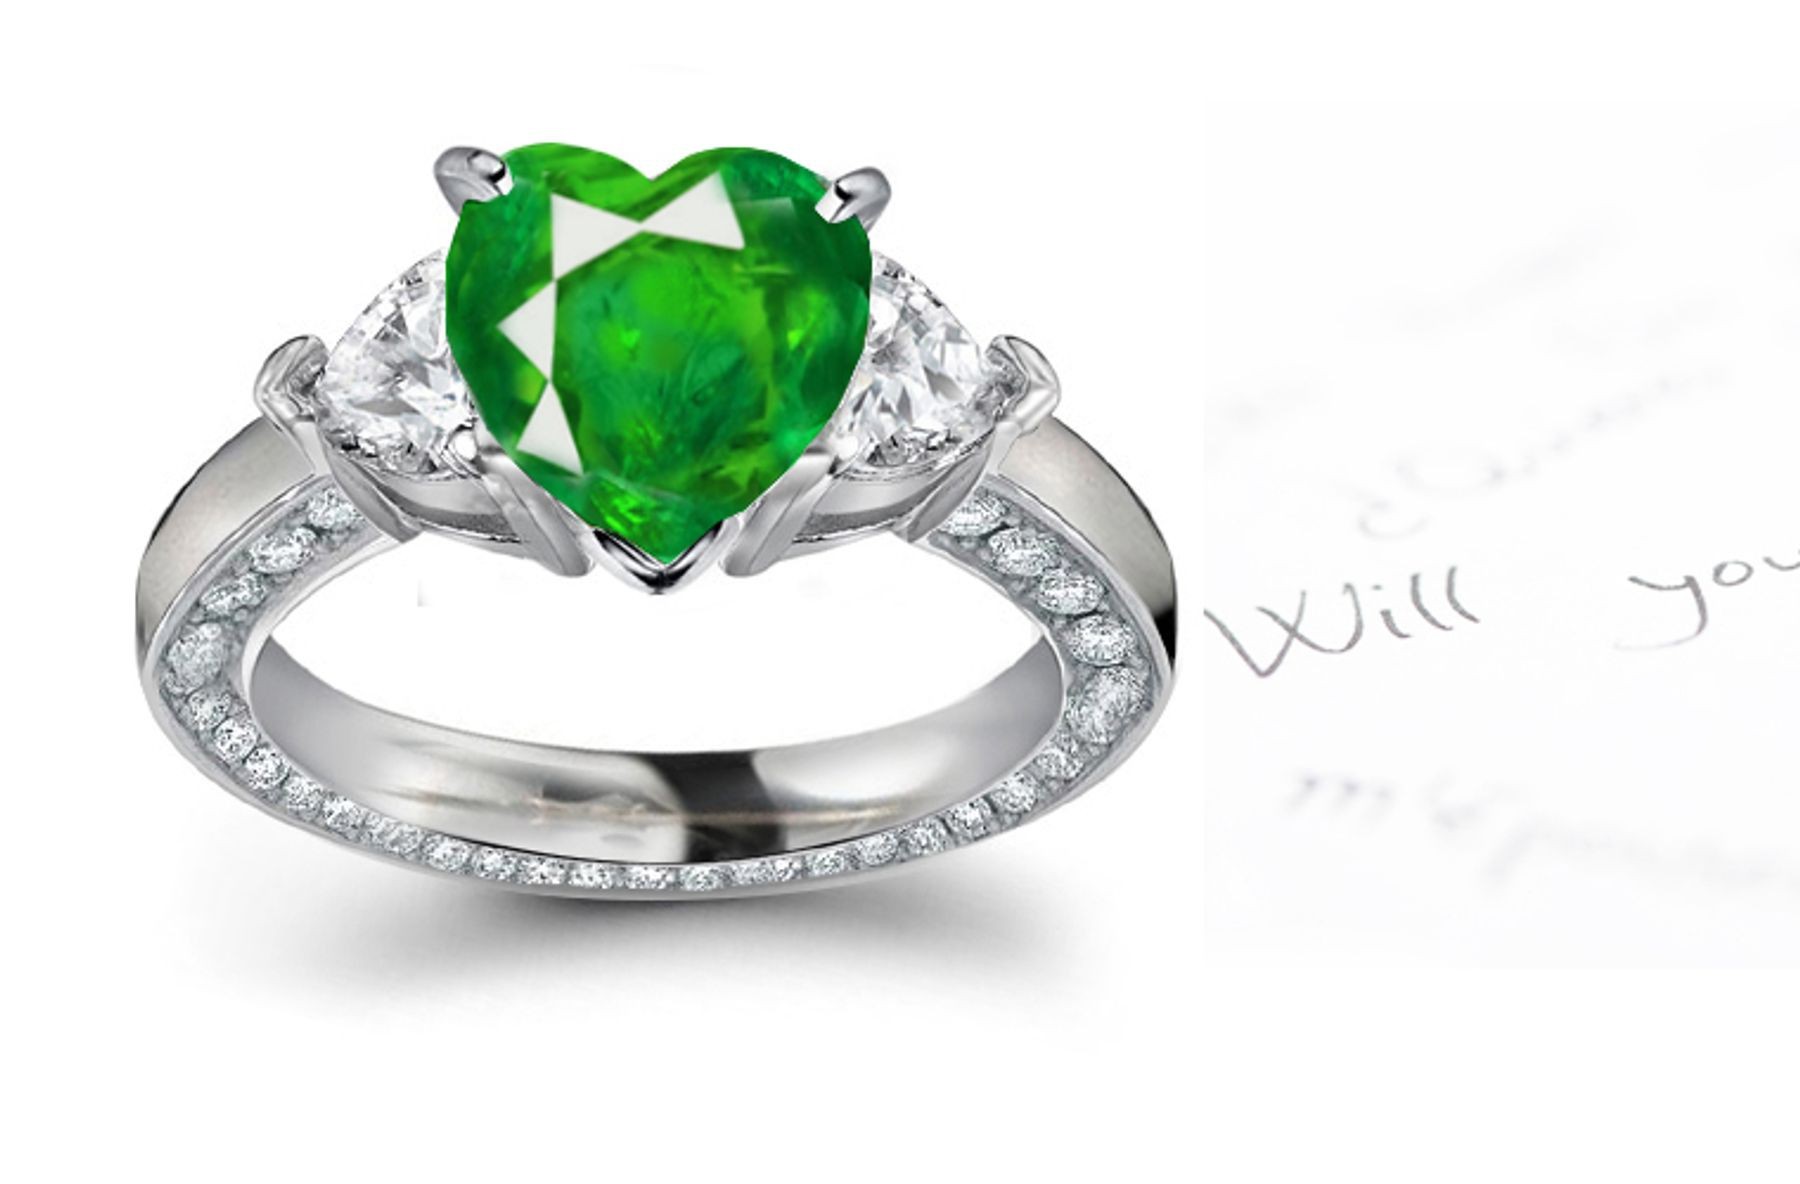 Offering Gifts of Emeralds: View This Exclusive Eye Catching Visual 3 Stone Heart Shape Emerald & Diamond Divine Mother Goddess Halo Light Ring